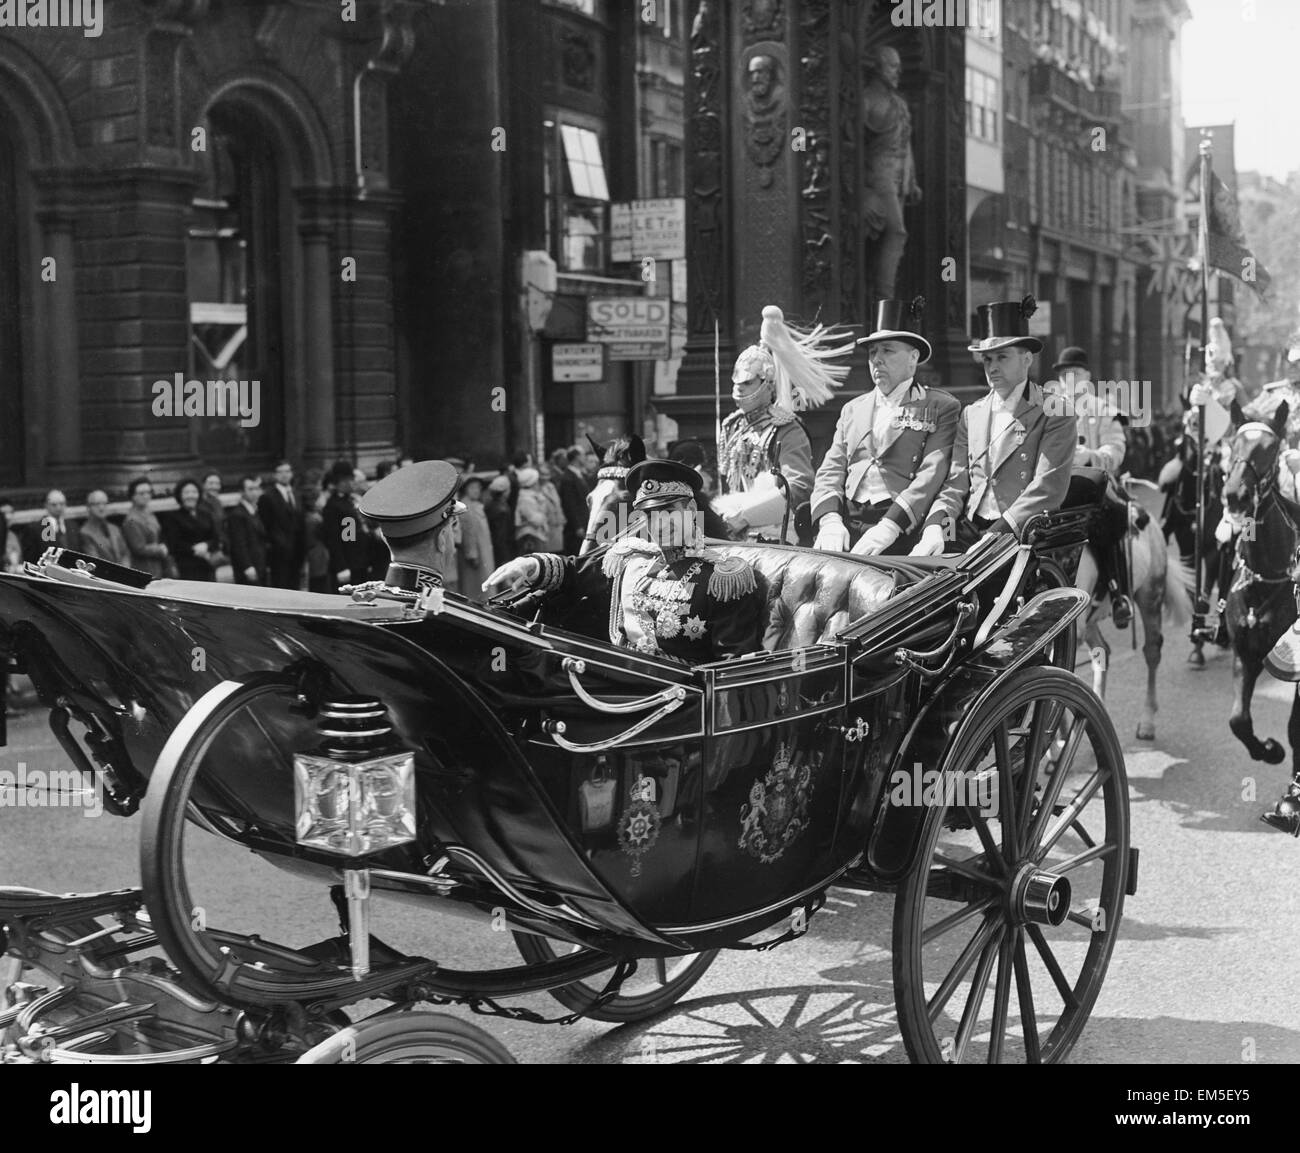 Mohammad-Reza Shah Pahlavi, the Shah of Iran, in procession driving up ...